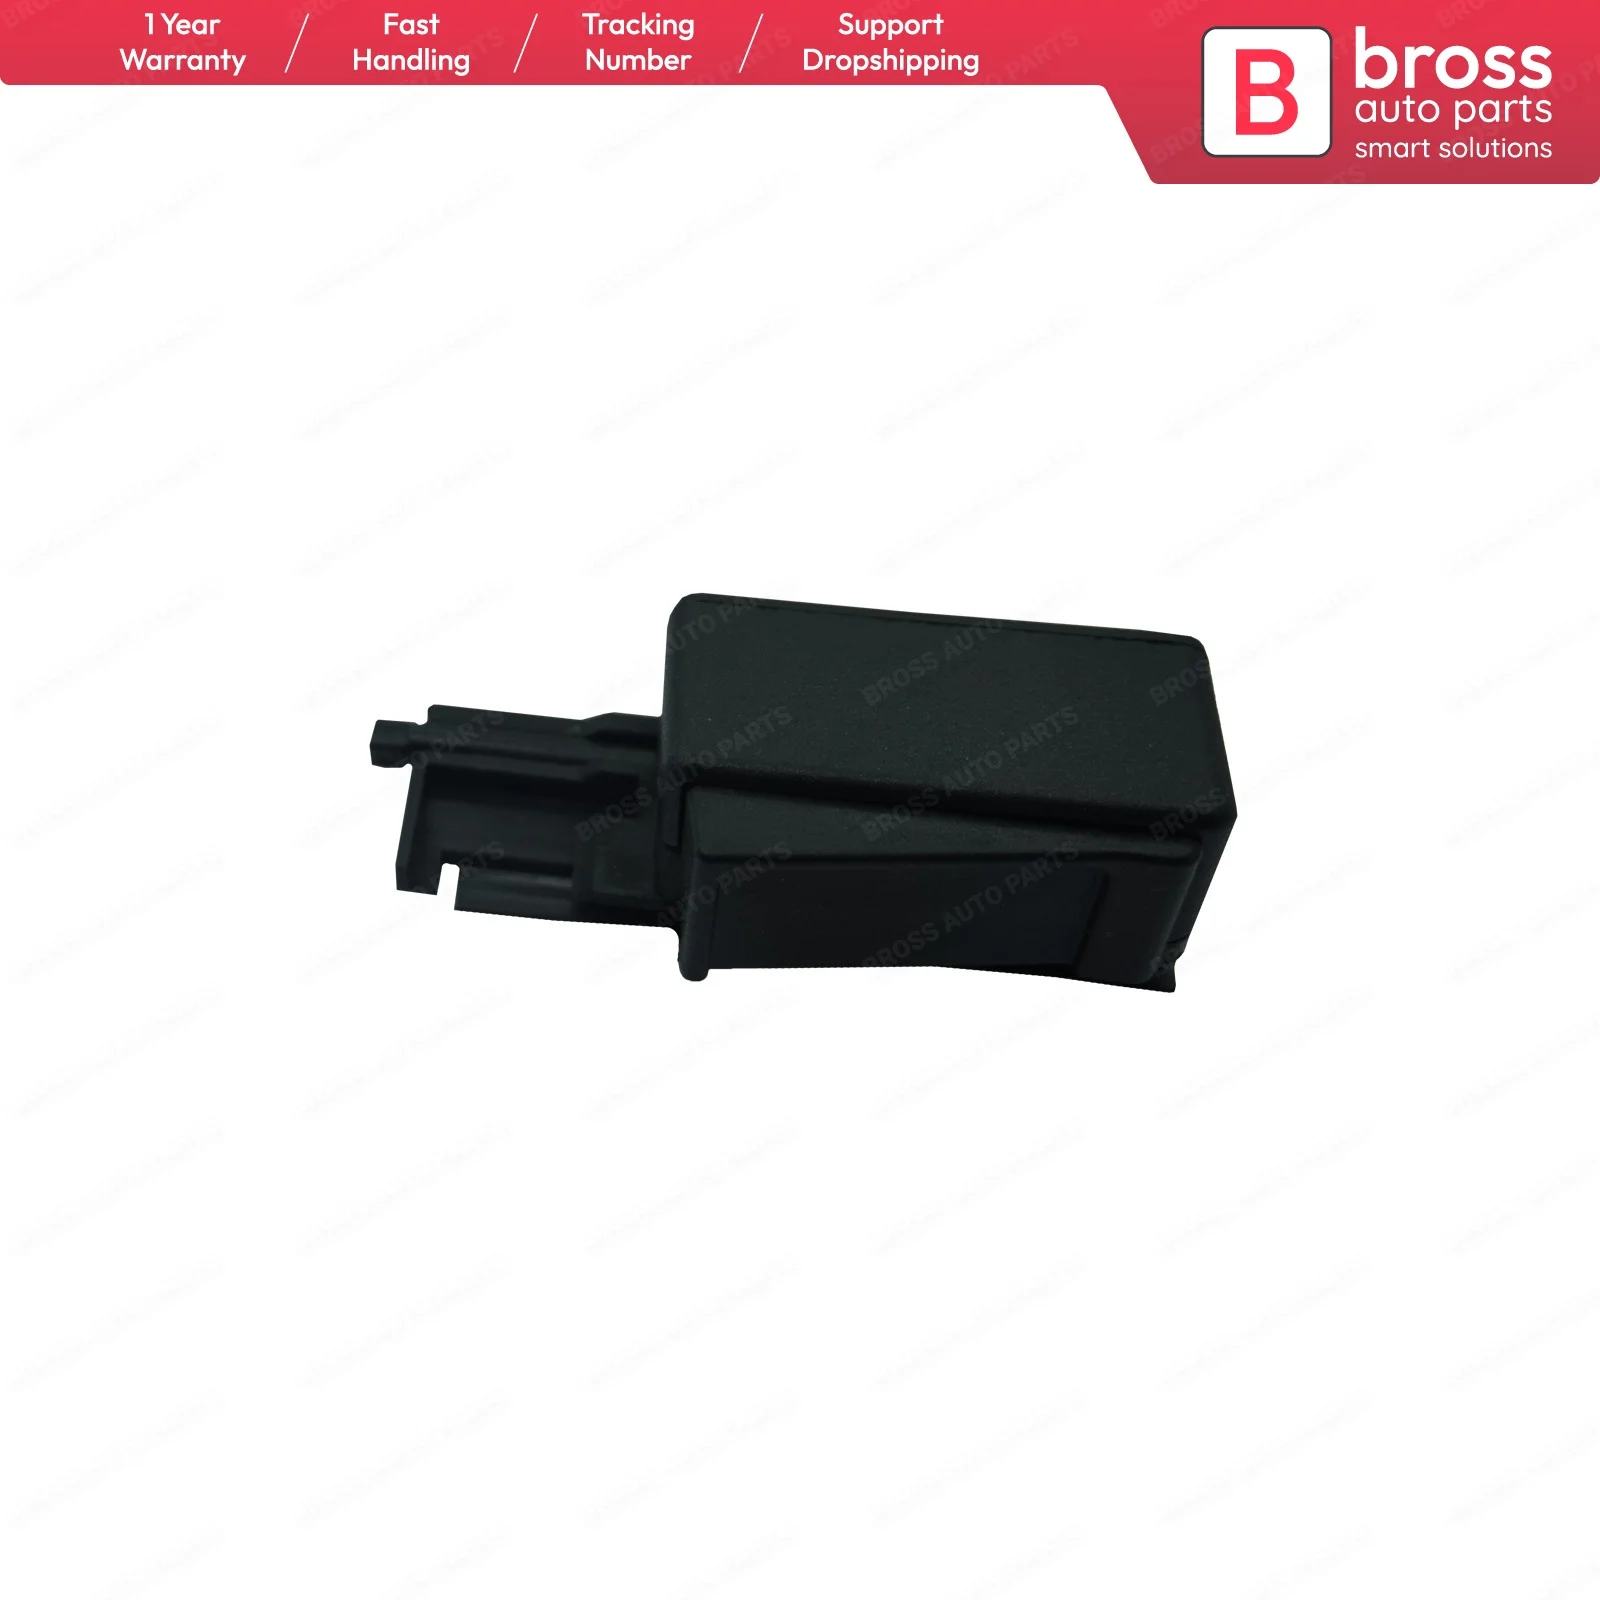 

Bross BDP909FBA Side Sliding Window Glass Lock Latch Part Right for Fiat Doblo 55170911 Fast Shipment Shipping From UK